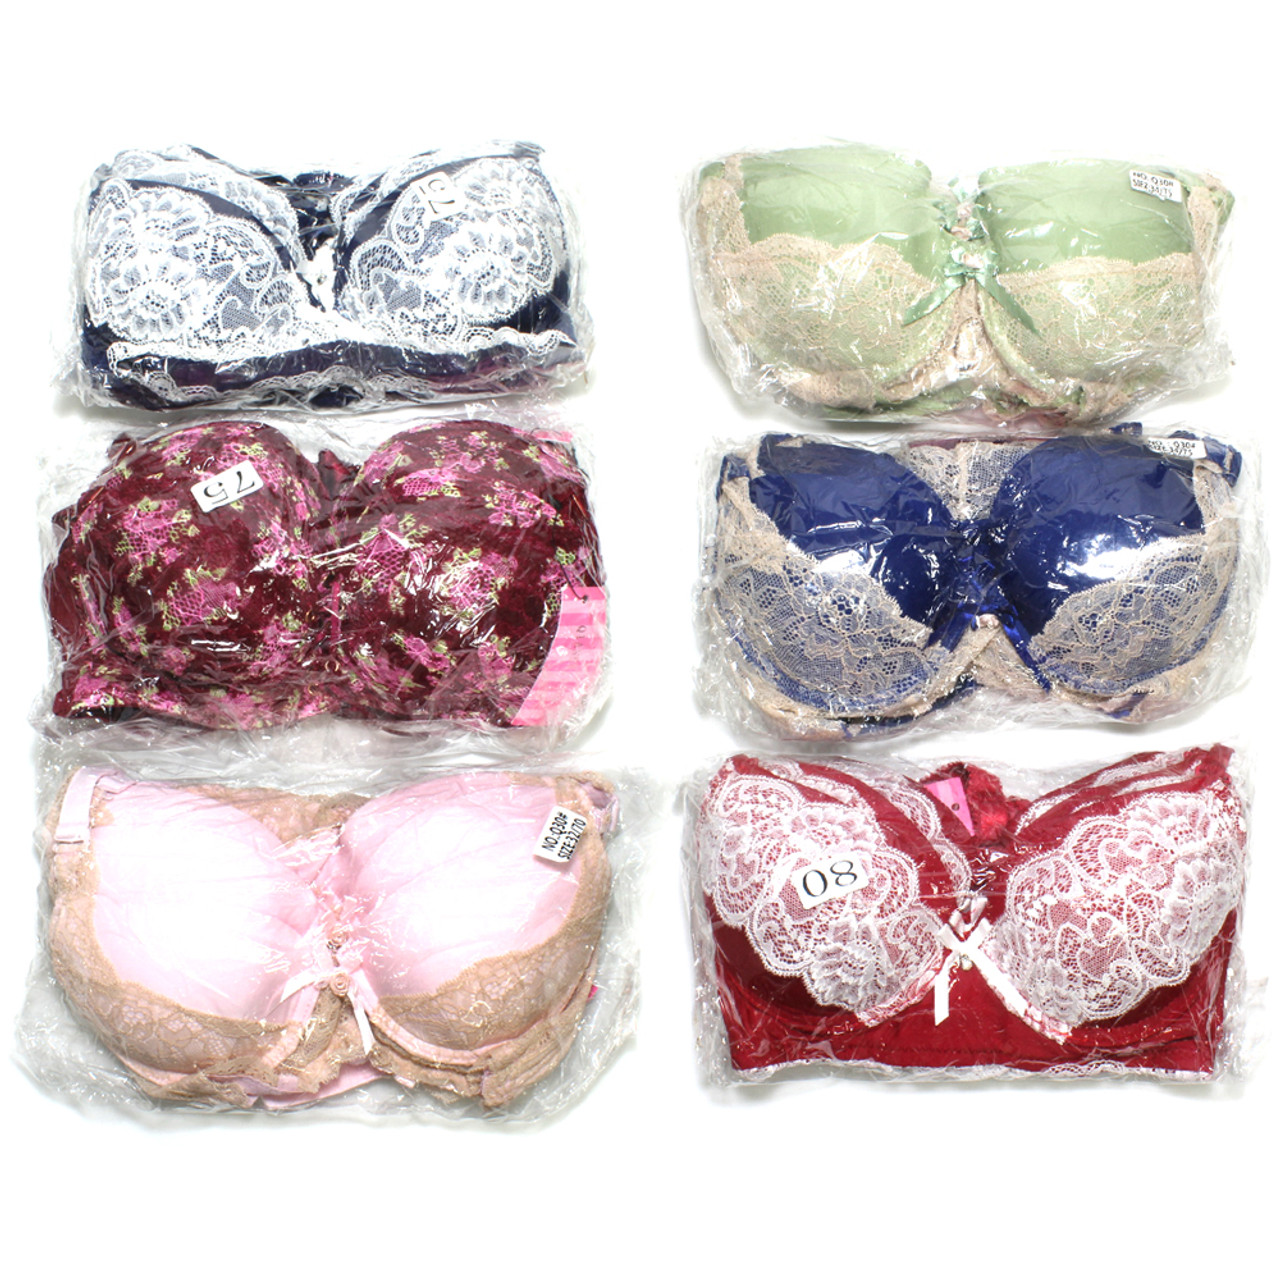 Wholesale bra importers For Supportive Underwear 